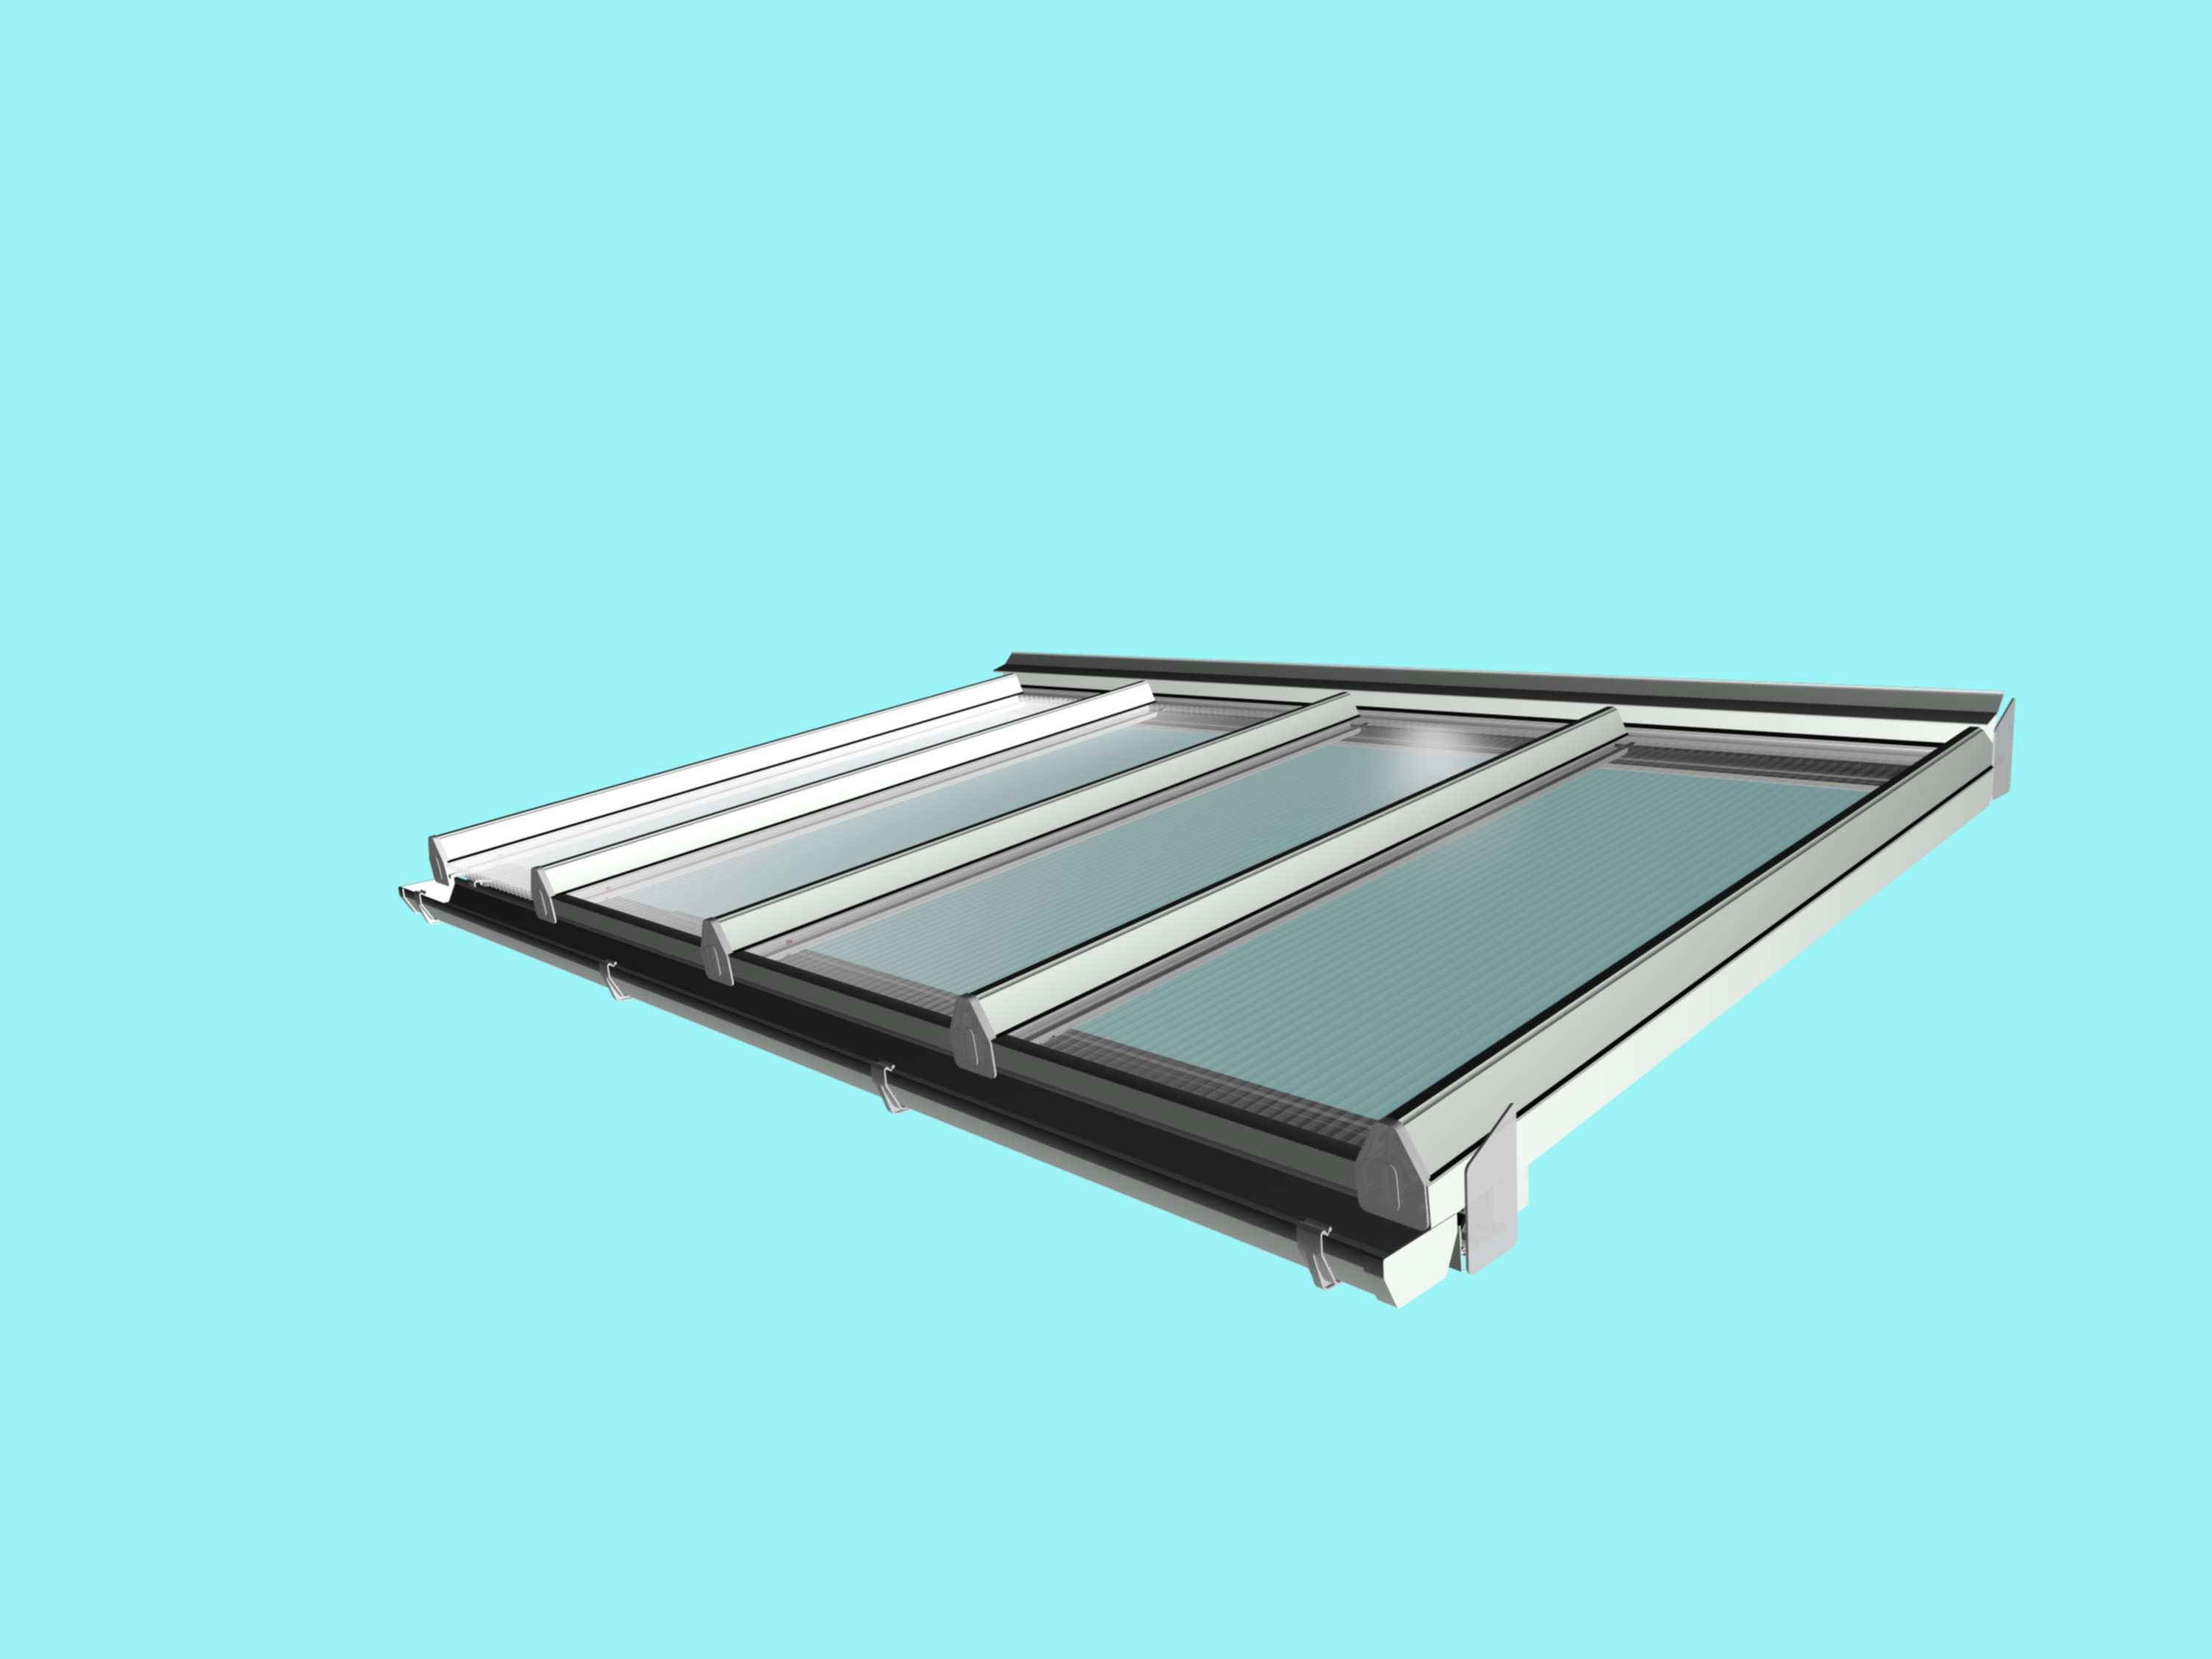 Self-Supporting DIY Conservatory Roof Kit for 25mm polycarbonate, 3.0m wide x 3.5m Projection from Omega Build